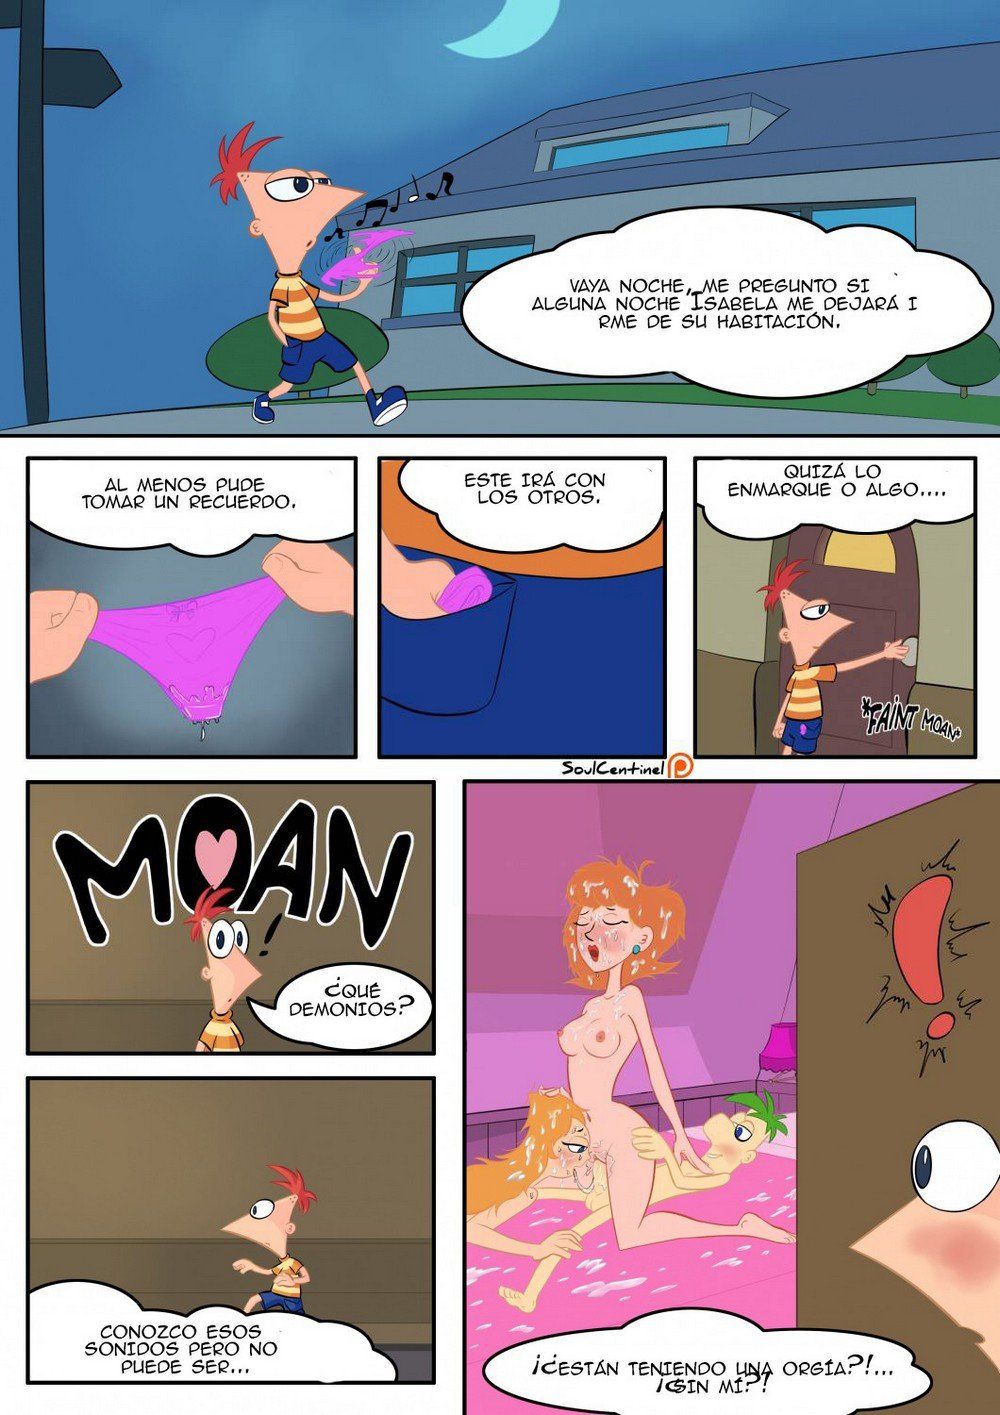 Phineas und ferb candace sex